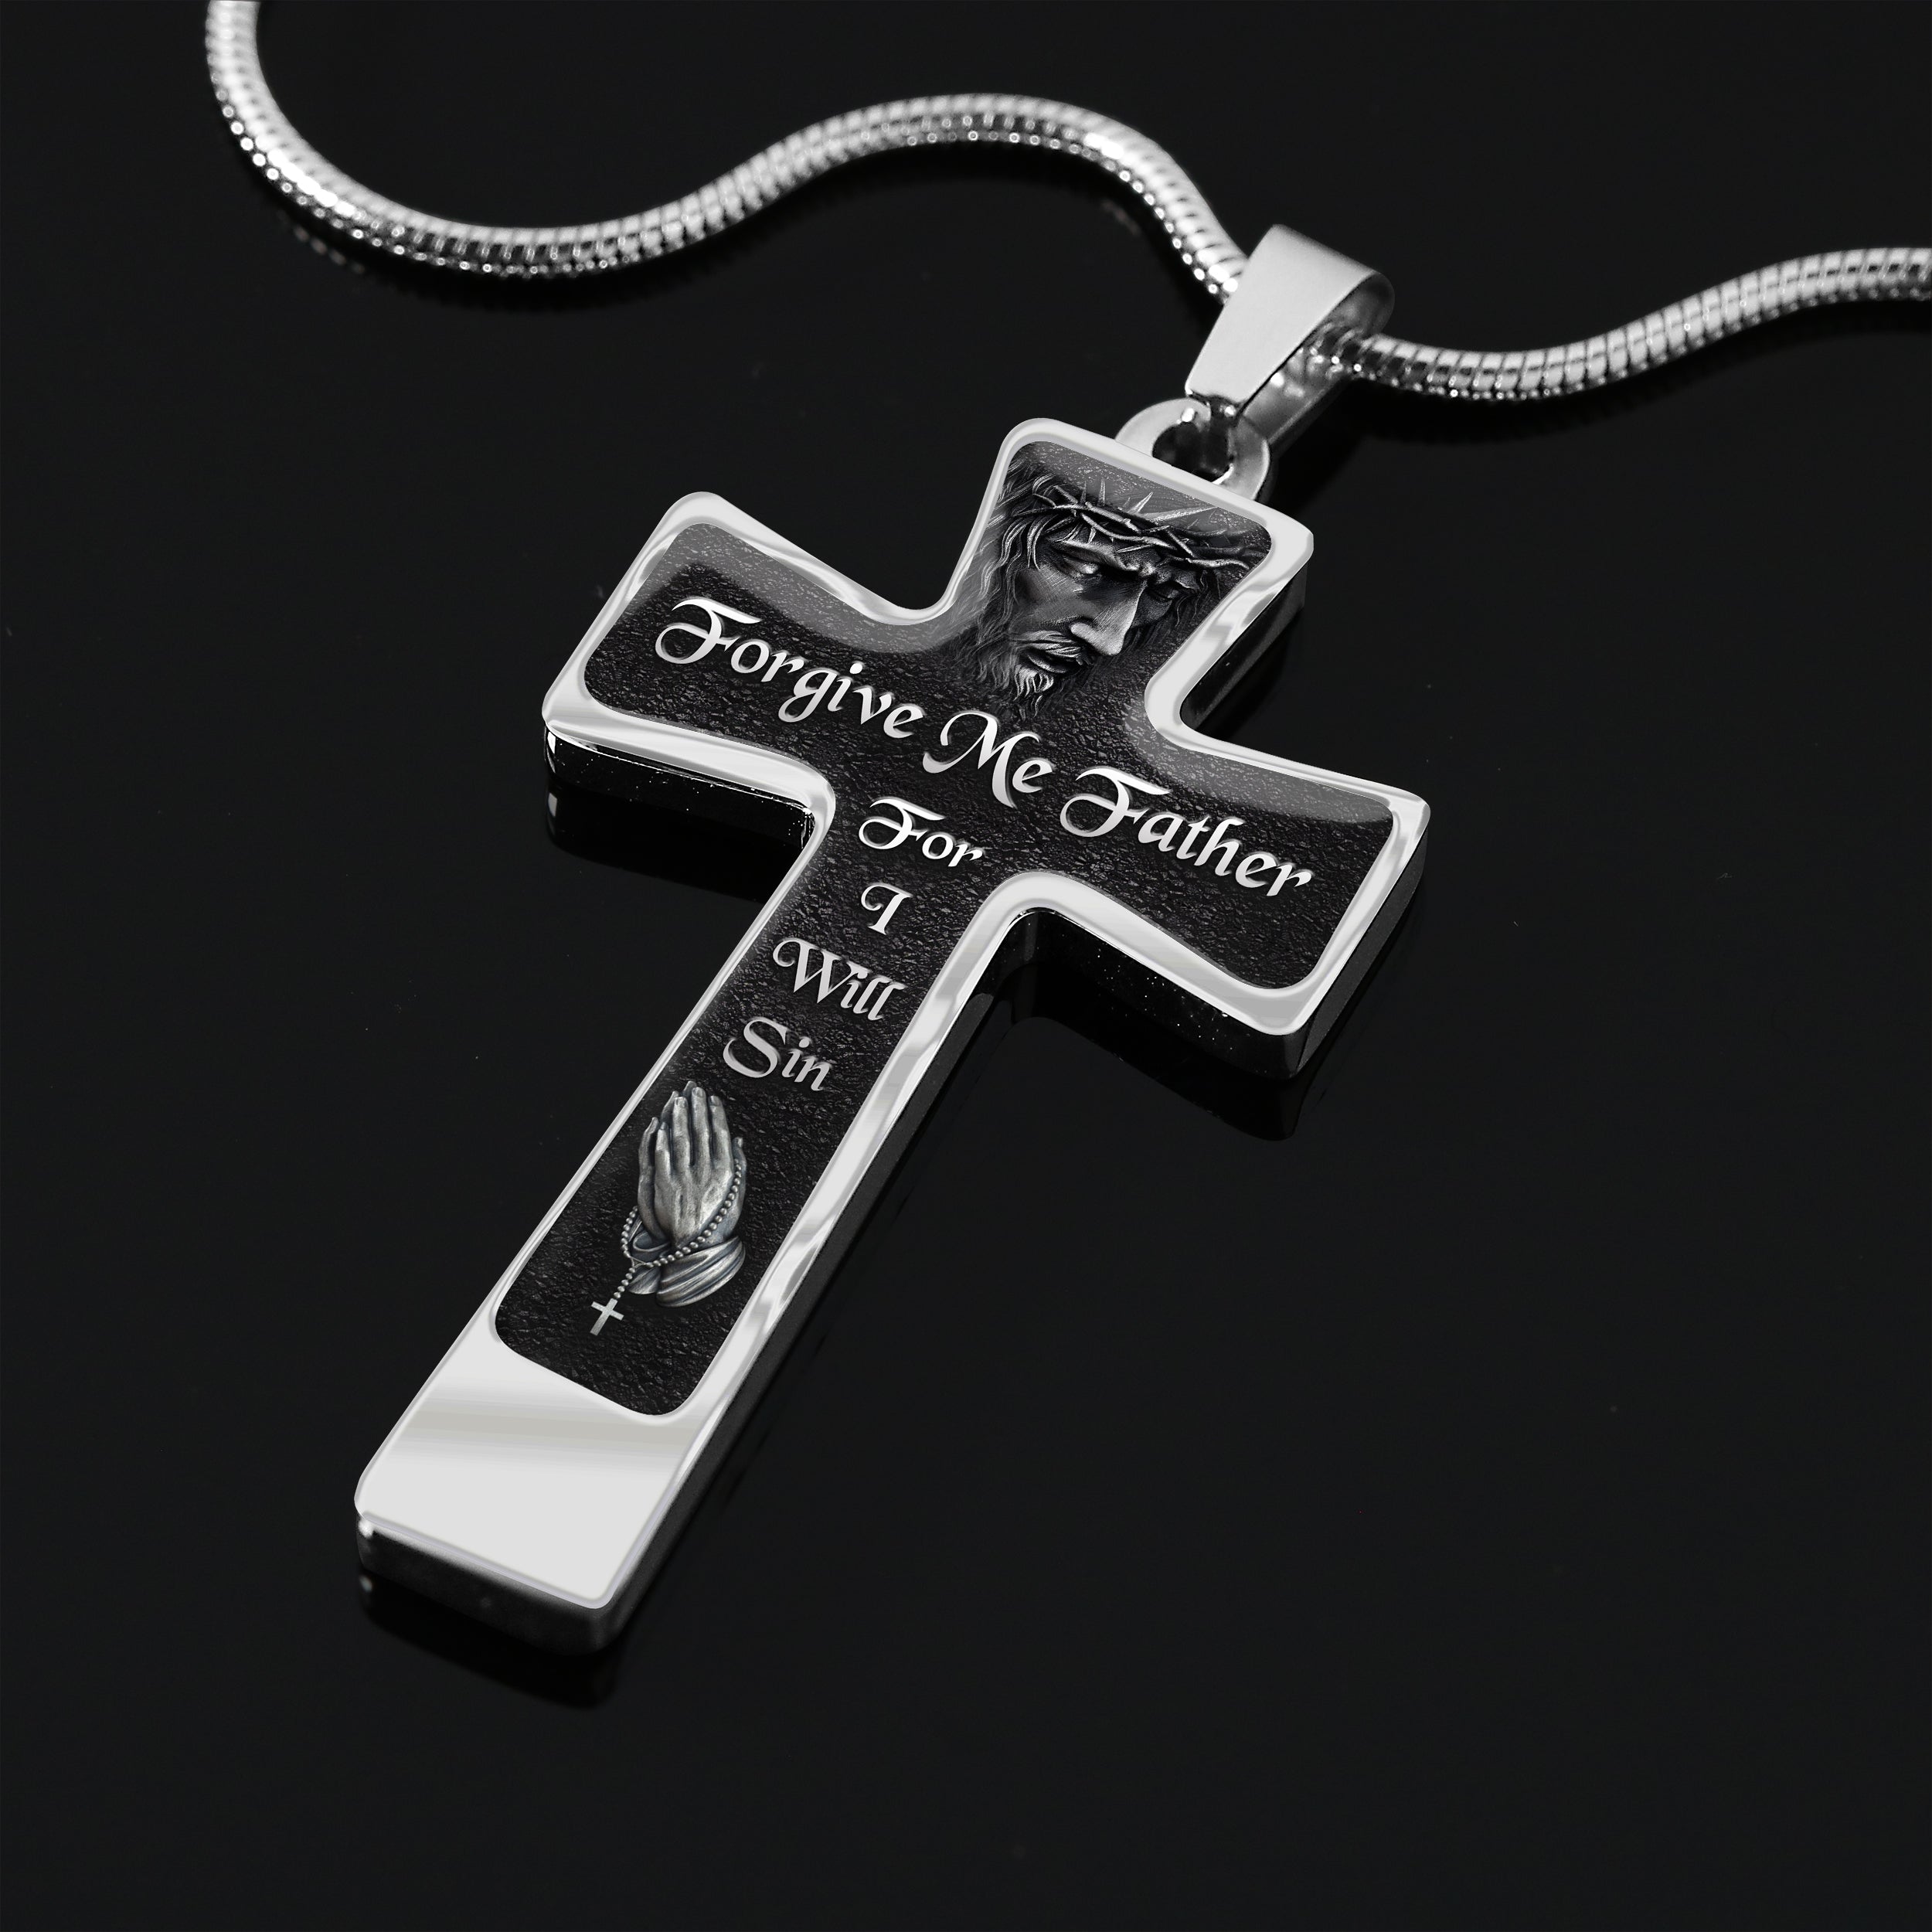 Custom Cross Necklace - Forgive me father, for i'll sin Hdmt